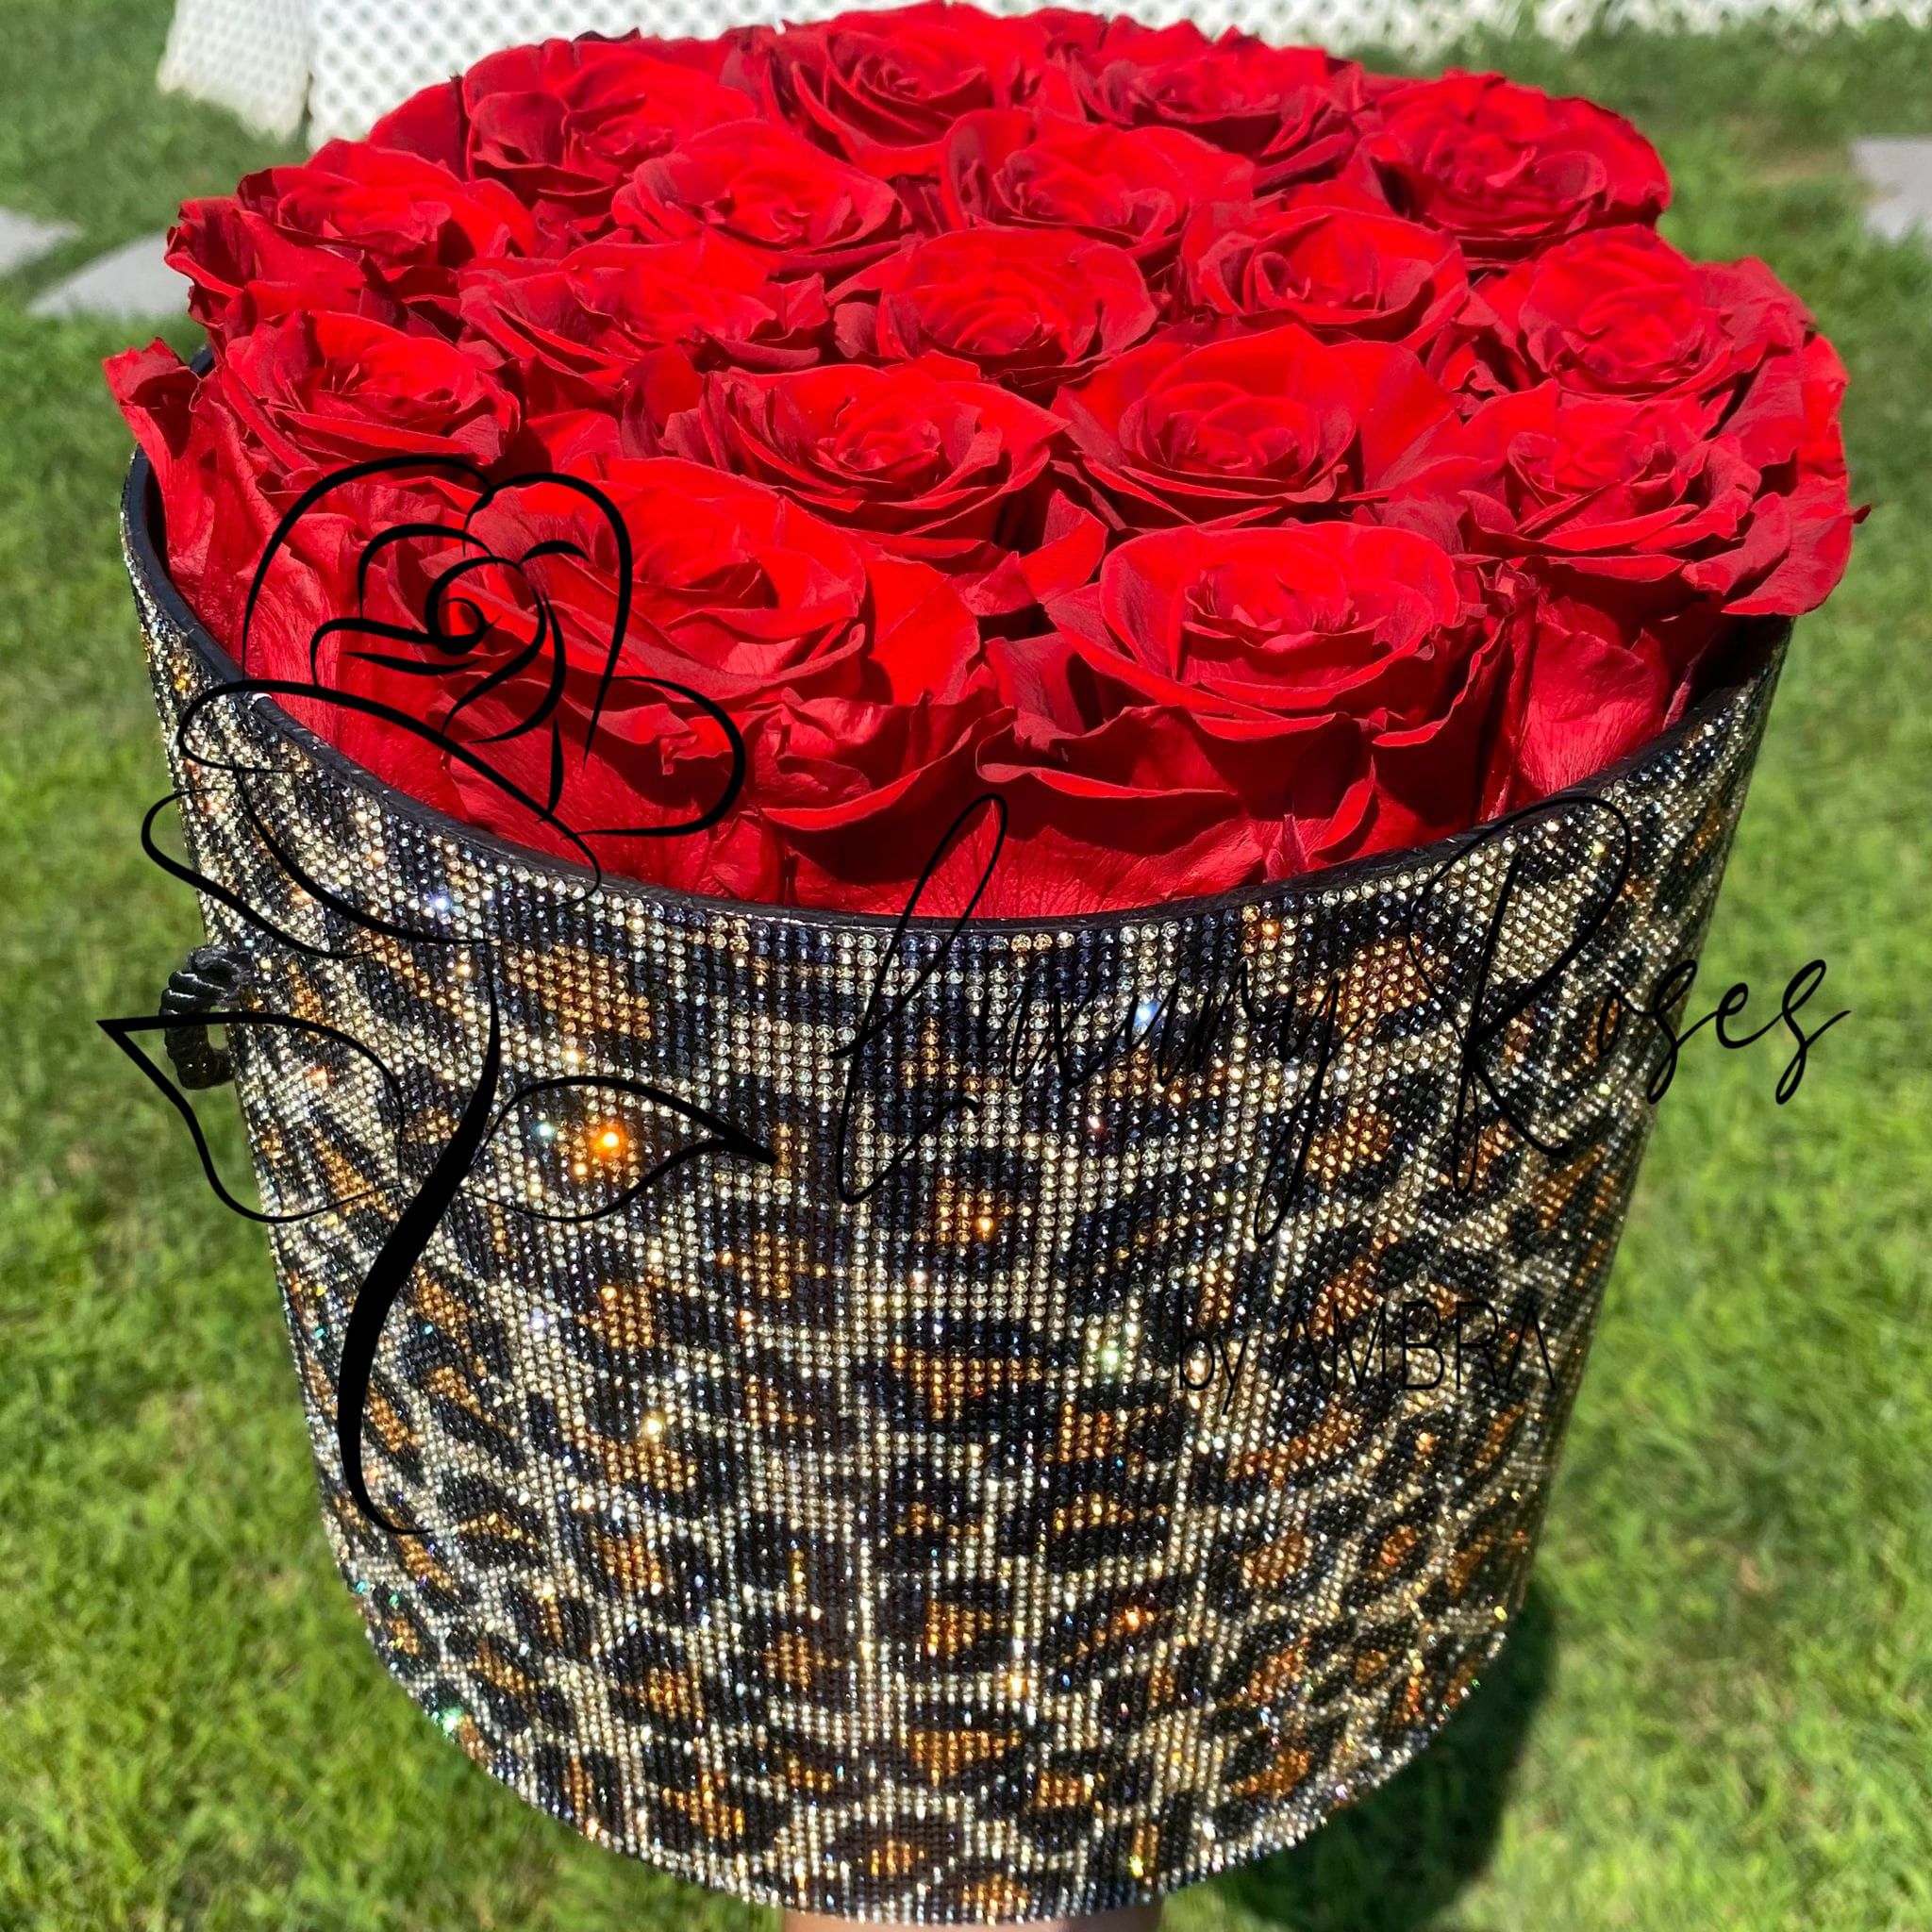 Red preserved roses Rhinestones Animal Print Leopard Eternal Box Roses Real Preserved Flowers Lasting Bouquet Bucket Anniversary Gift